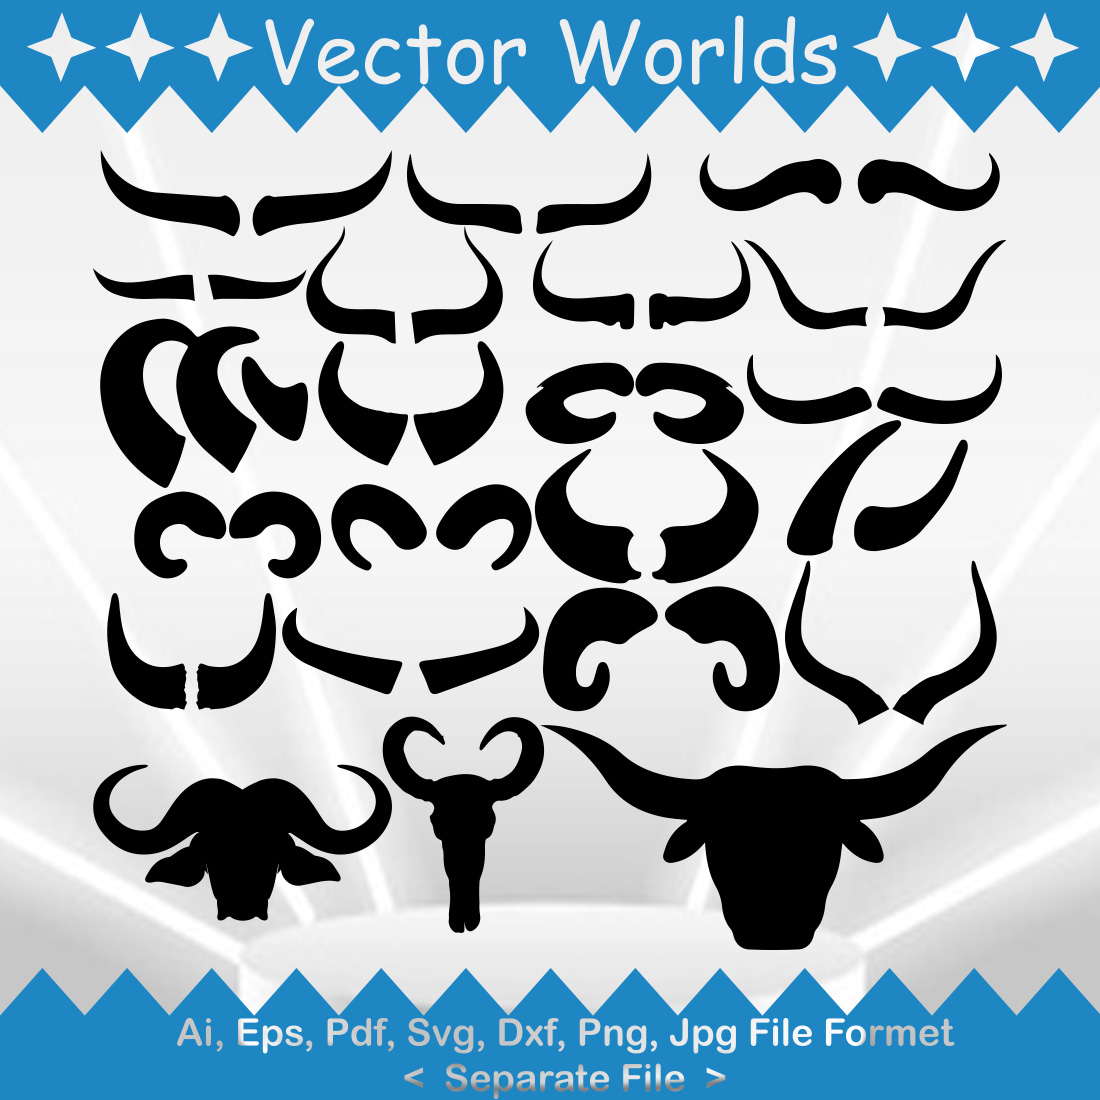 Set of black and white silhouettes of bull heads.